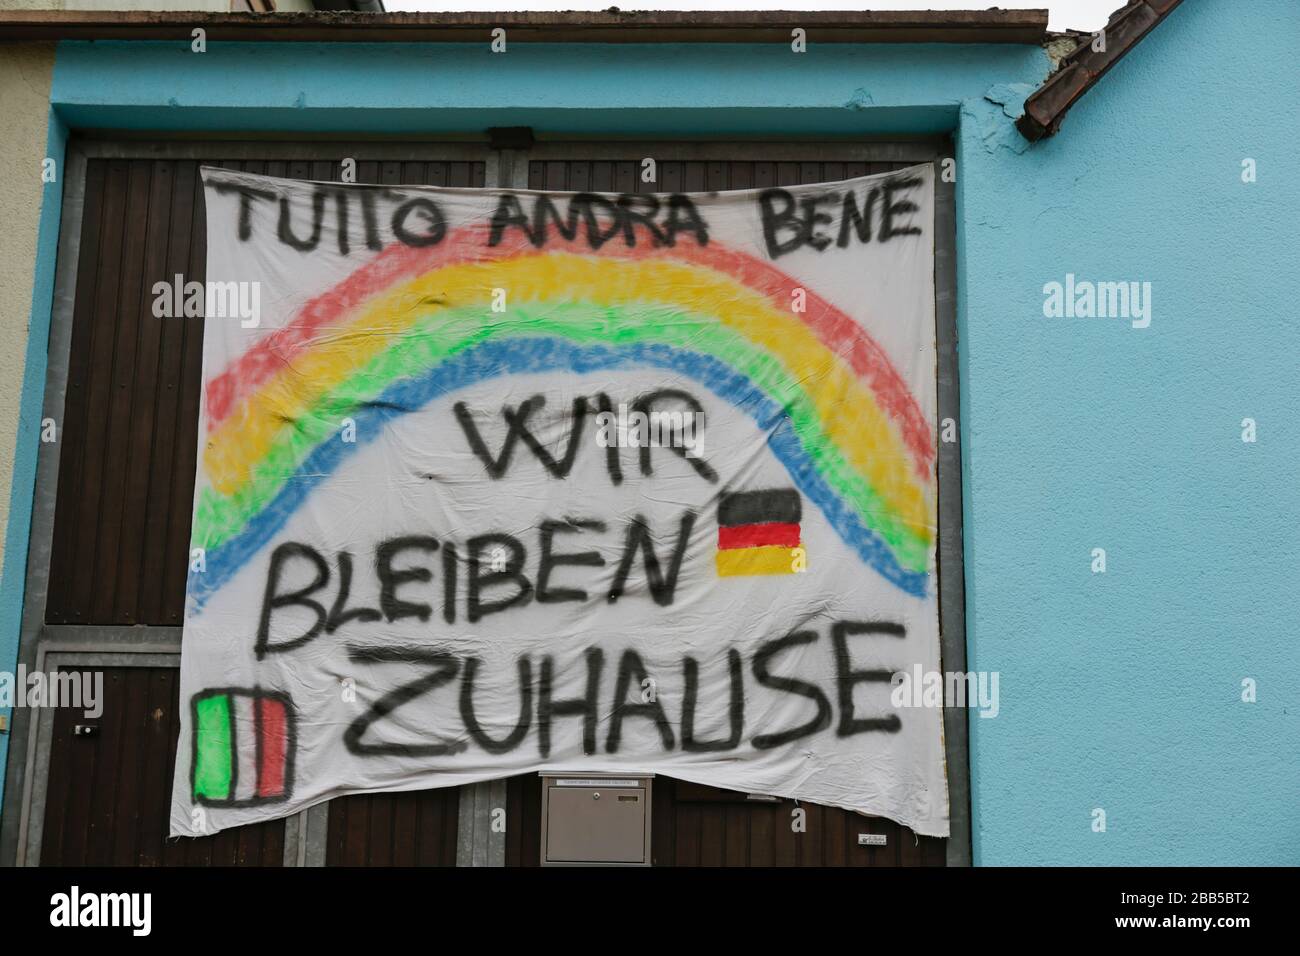 Worms, Germany. 29th March 2020. A large banner with a rainbow and “Everything will be oh” in Italian and “We stay at home” in German written on it, hangs on a house. While no curfew has been enacted in Germany during the current COVID-19 crisis, Germans are encouraged to stay at home and to limit meetings with people outside their household as much as possible. Stock Photo